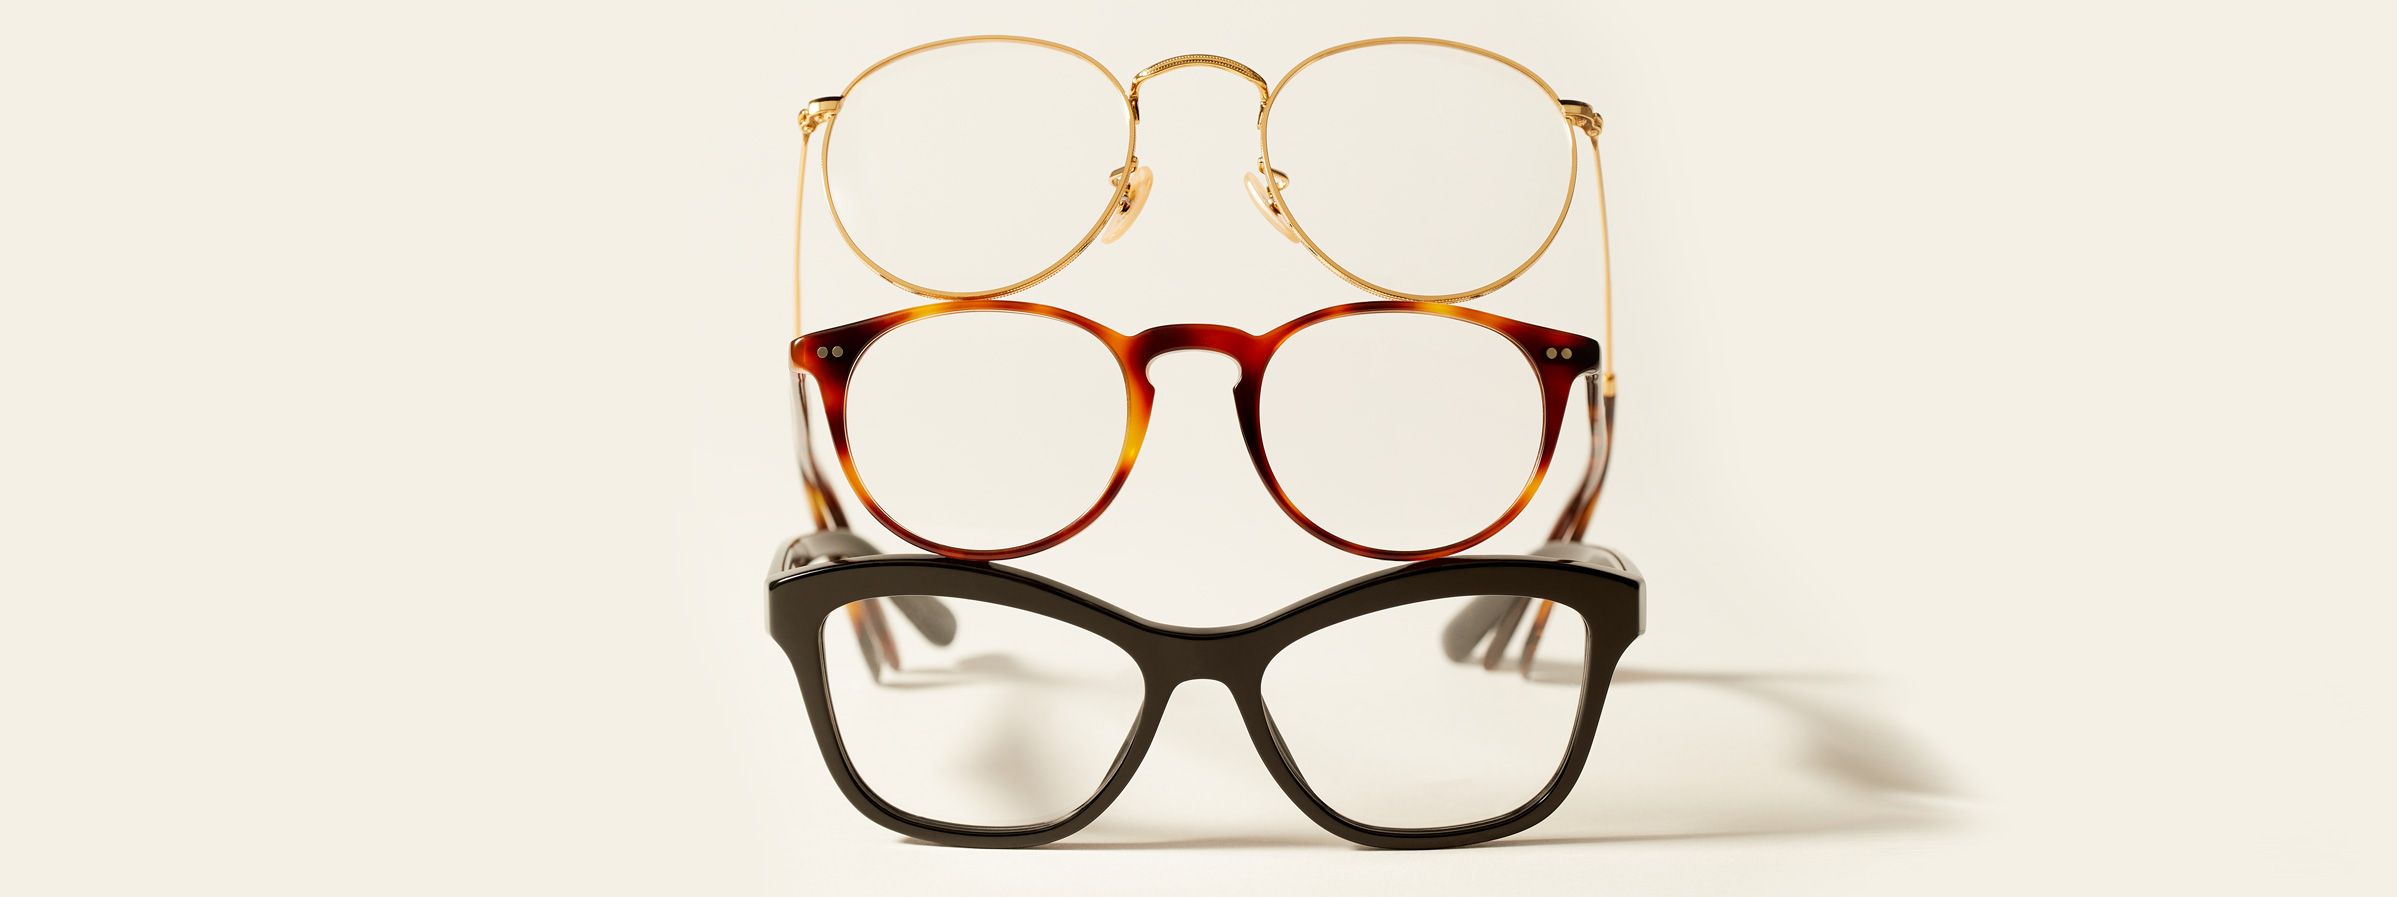 an image of three reading glasses stacked ontop of eachother